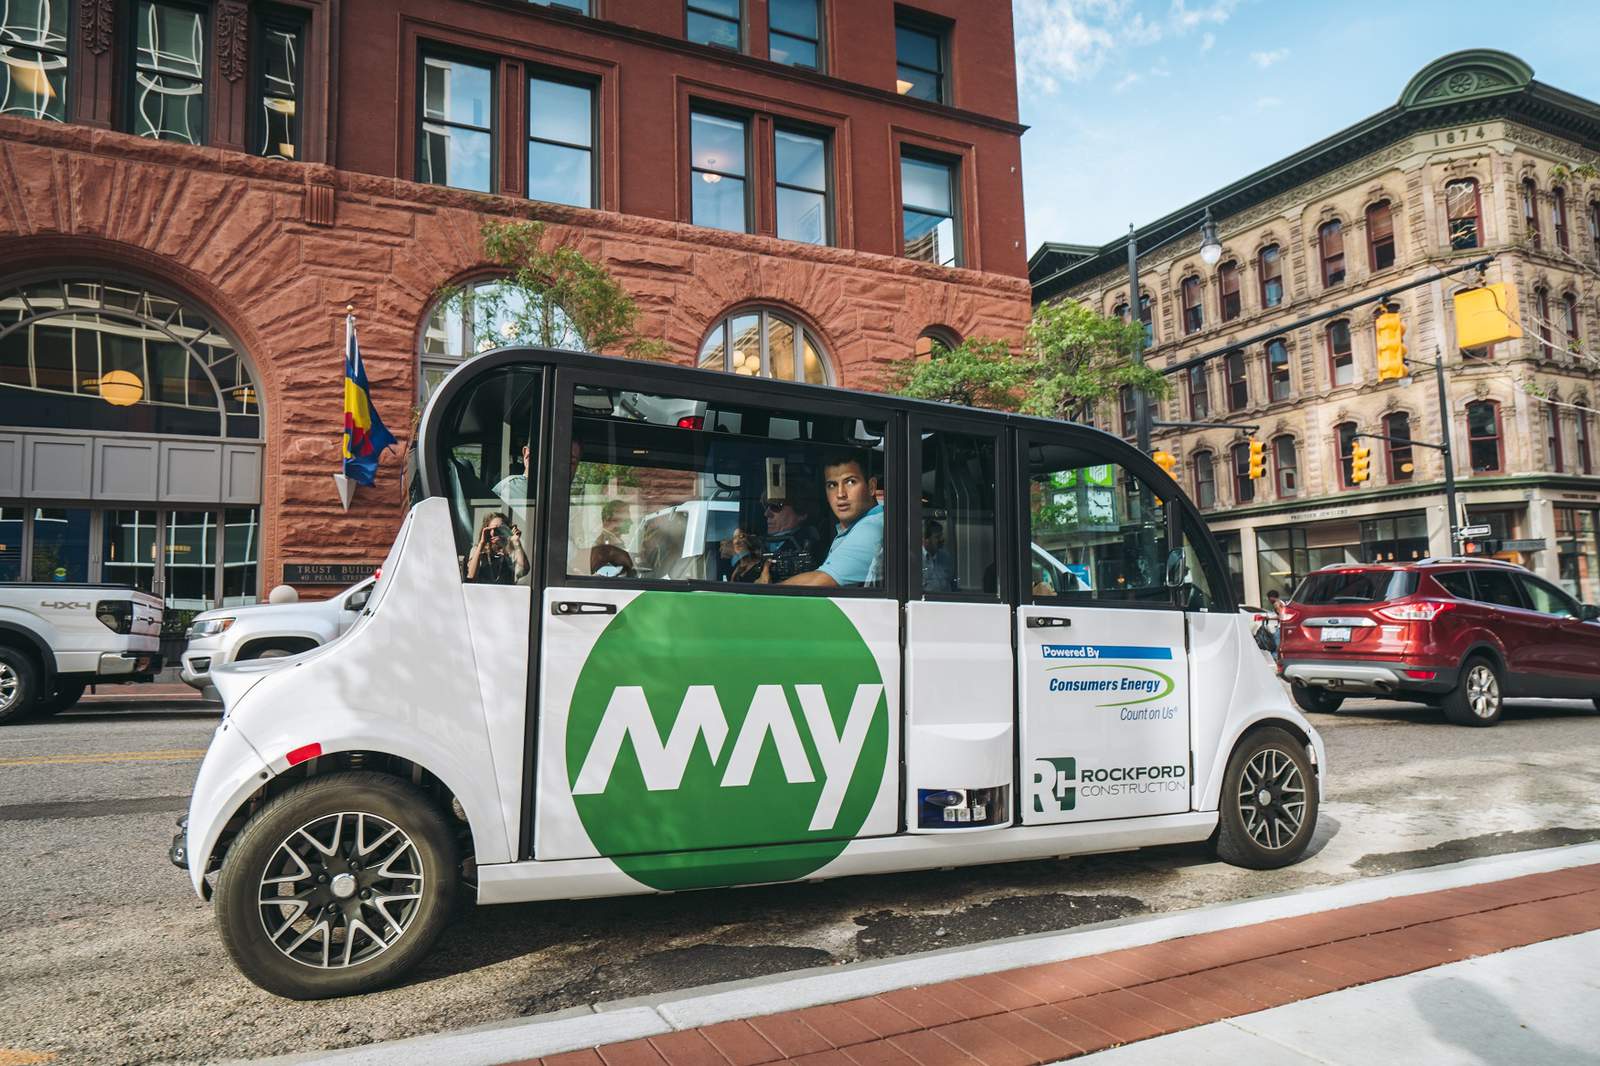 May Mobility expanding in Ann Arbor; highlights leadership in autonomous vehicle technology